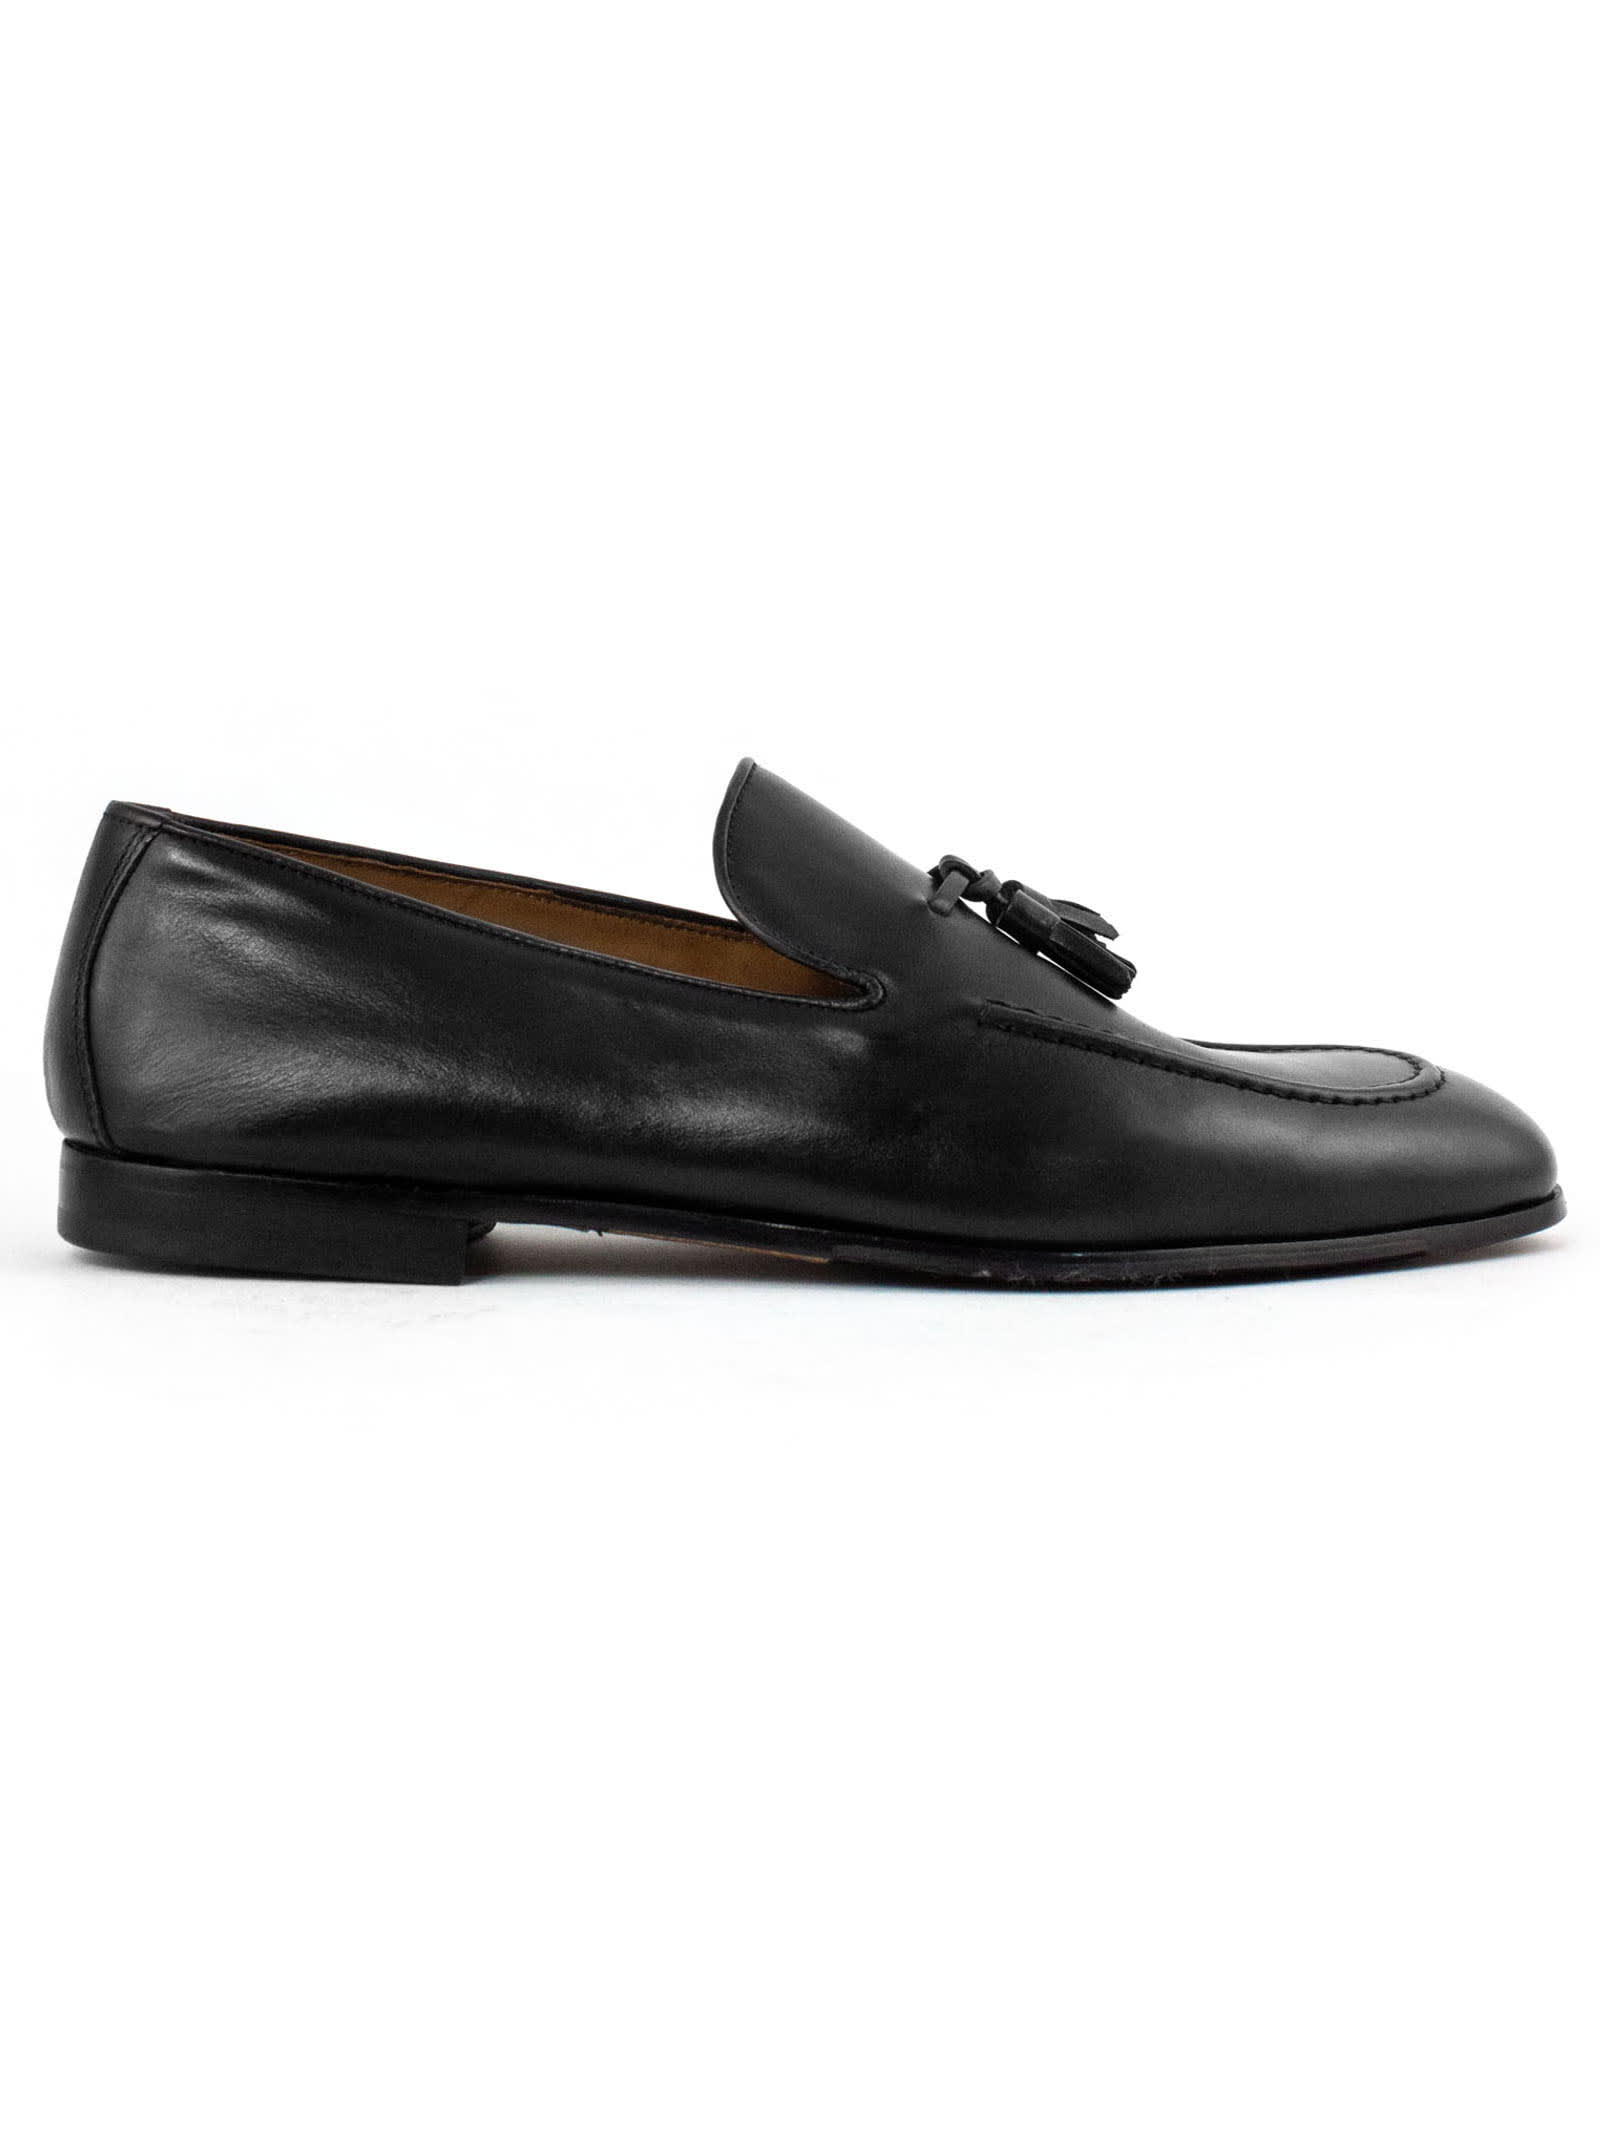 Doucals Black Smooth Leather Loafer